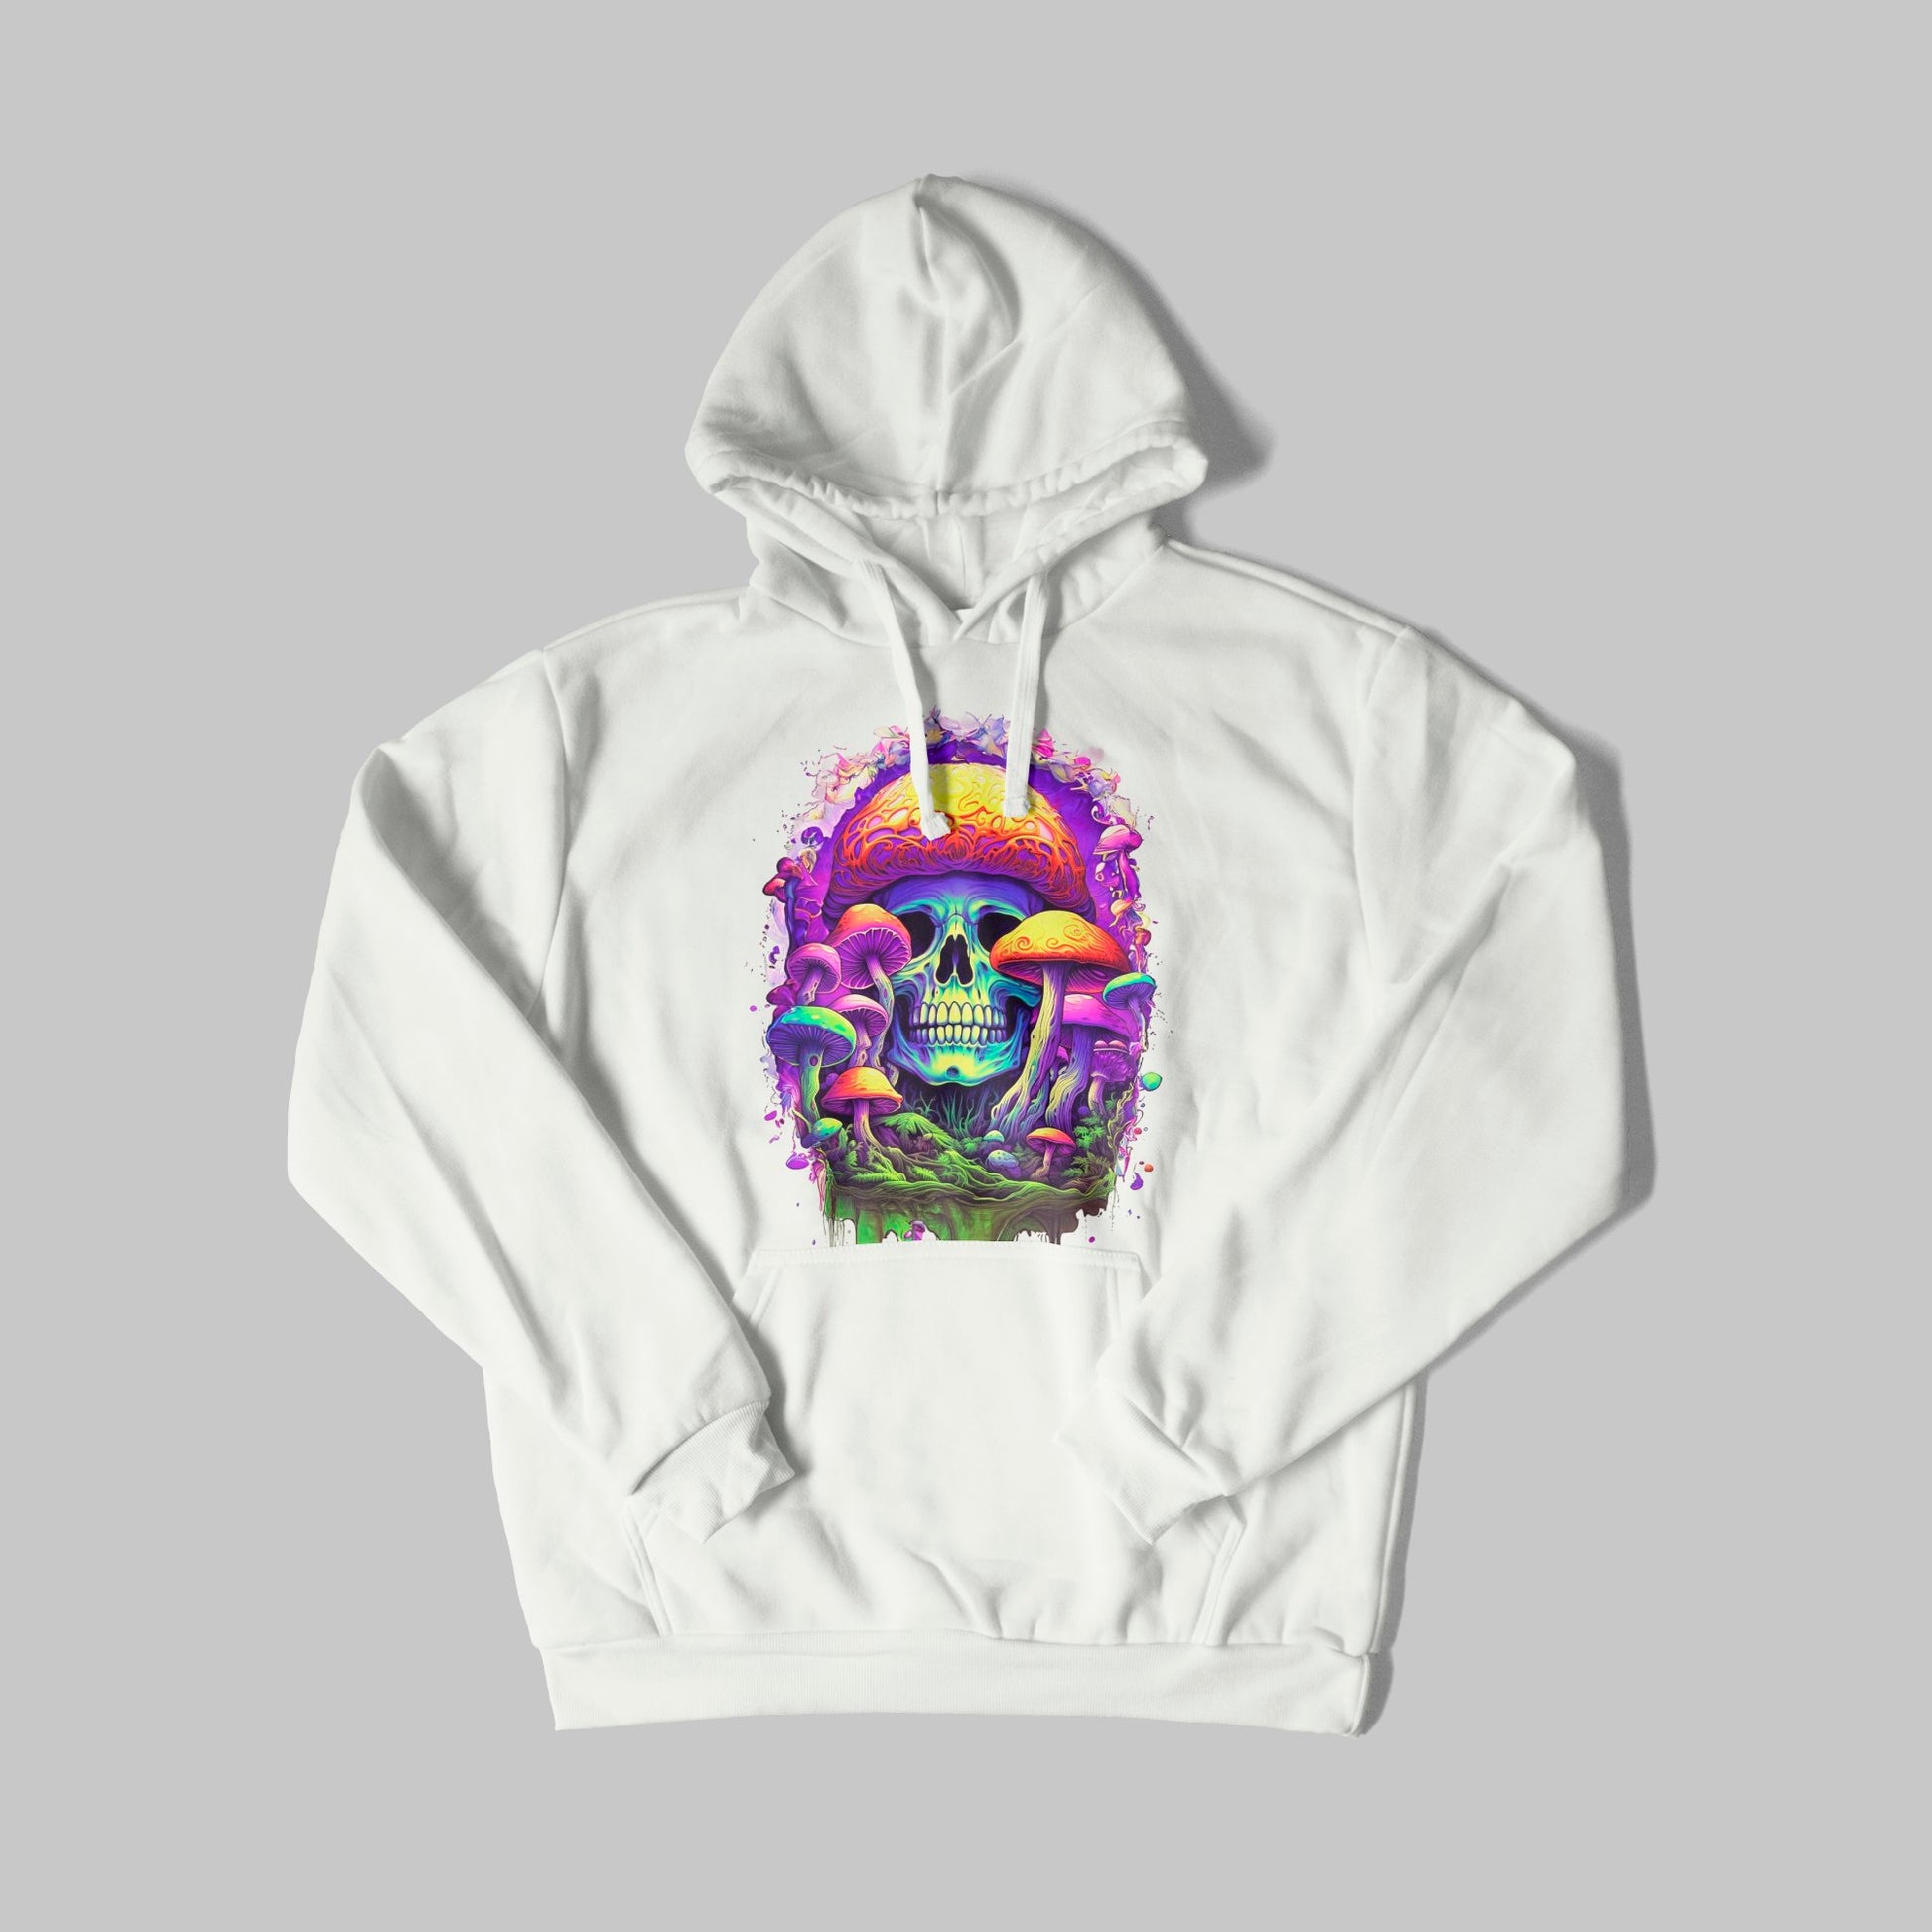 the_skull_and_mushroom_design_with_a_girl_wearing_a__b2ed024f-f315-40ee-bc4d-2e6b6bde2348 - Image 4